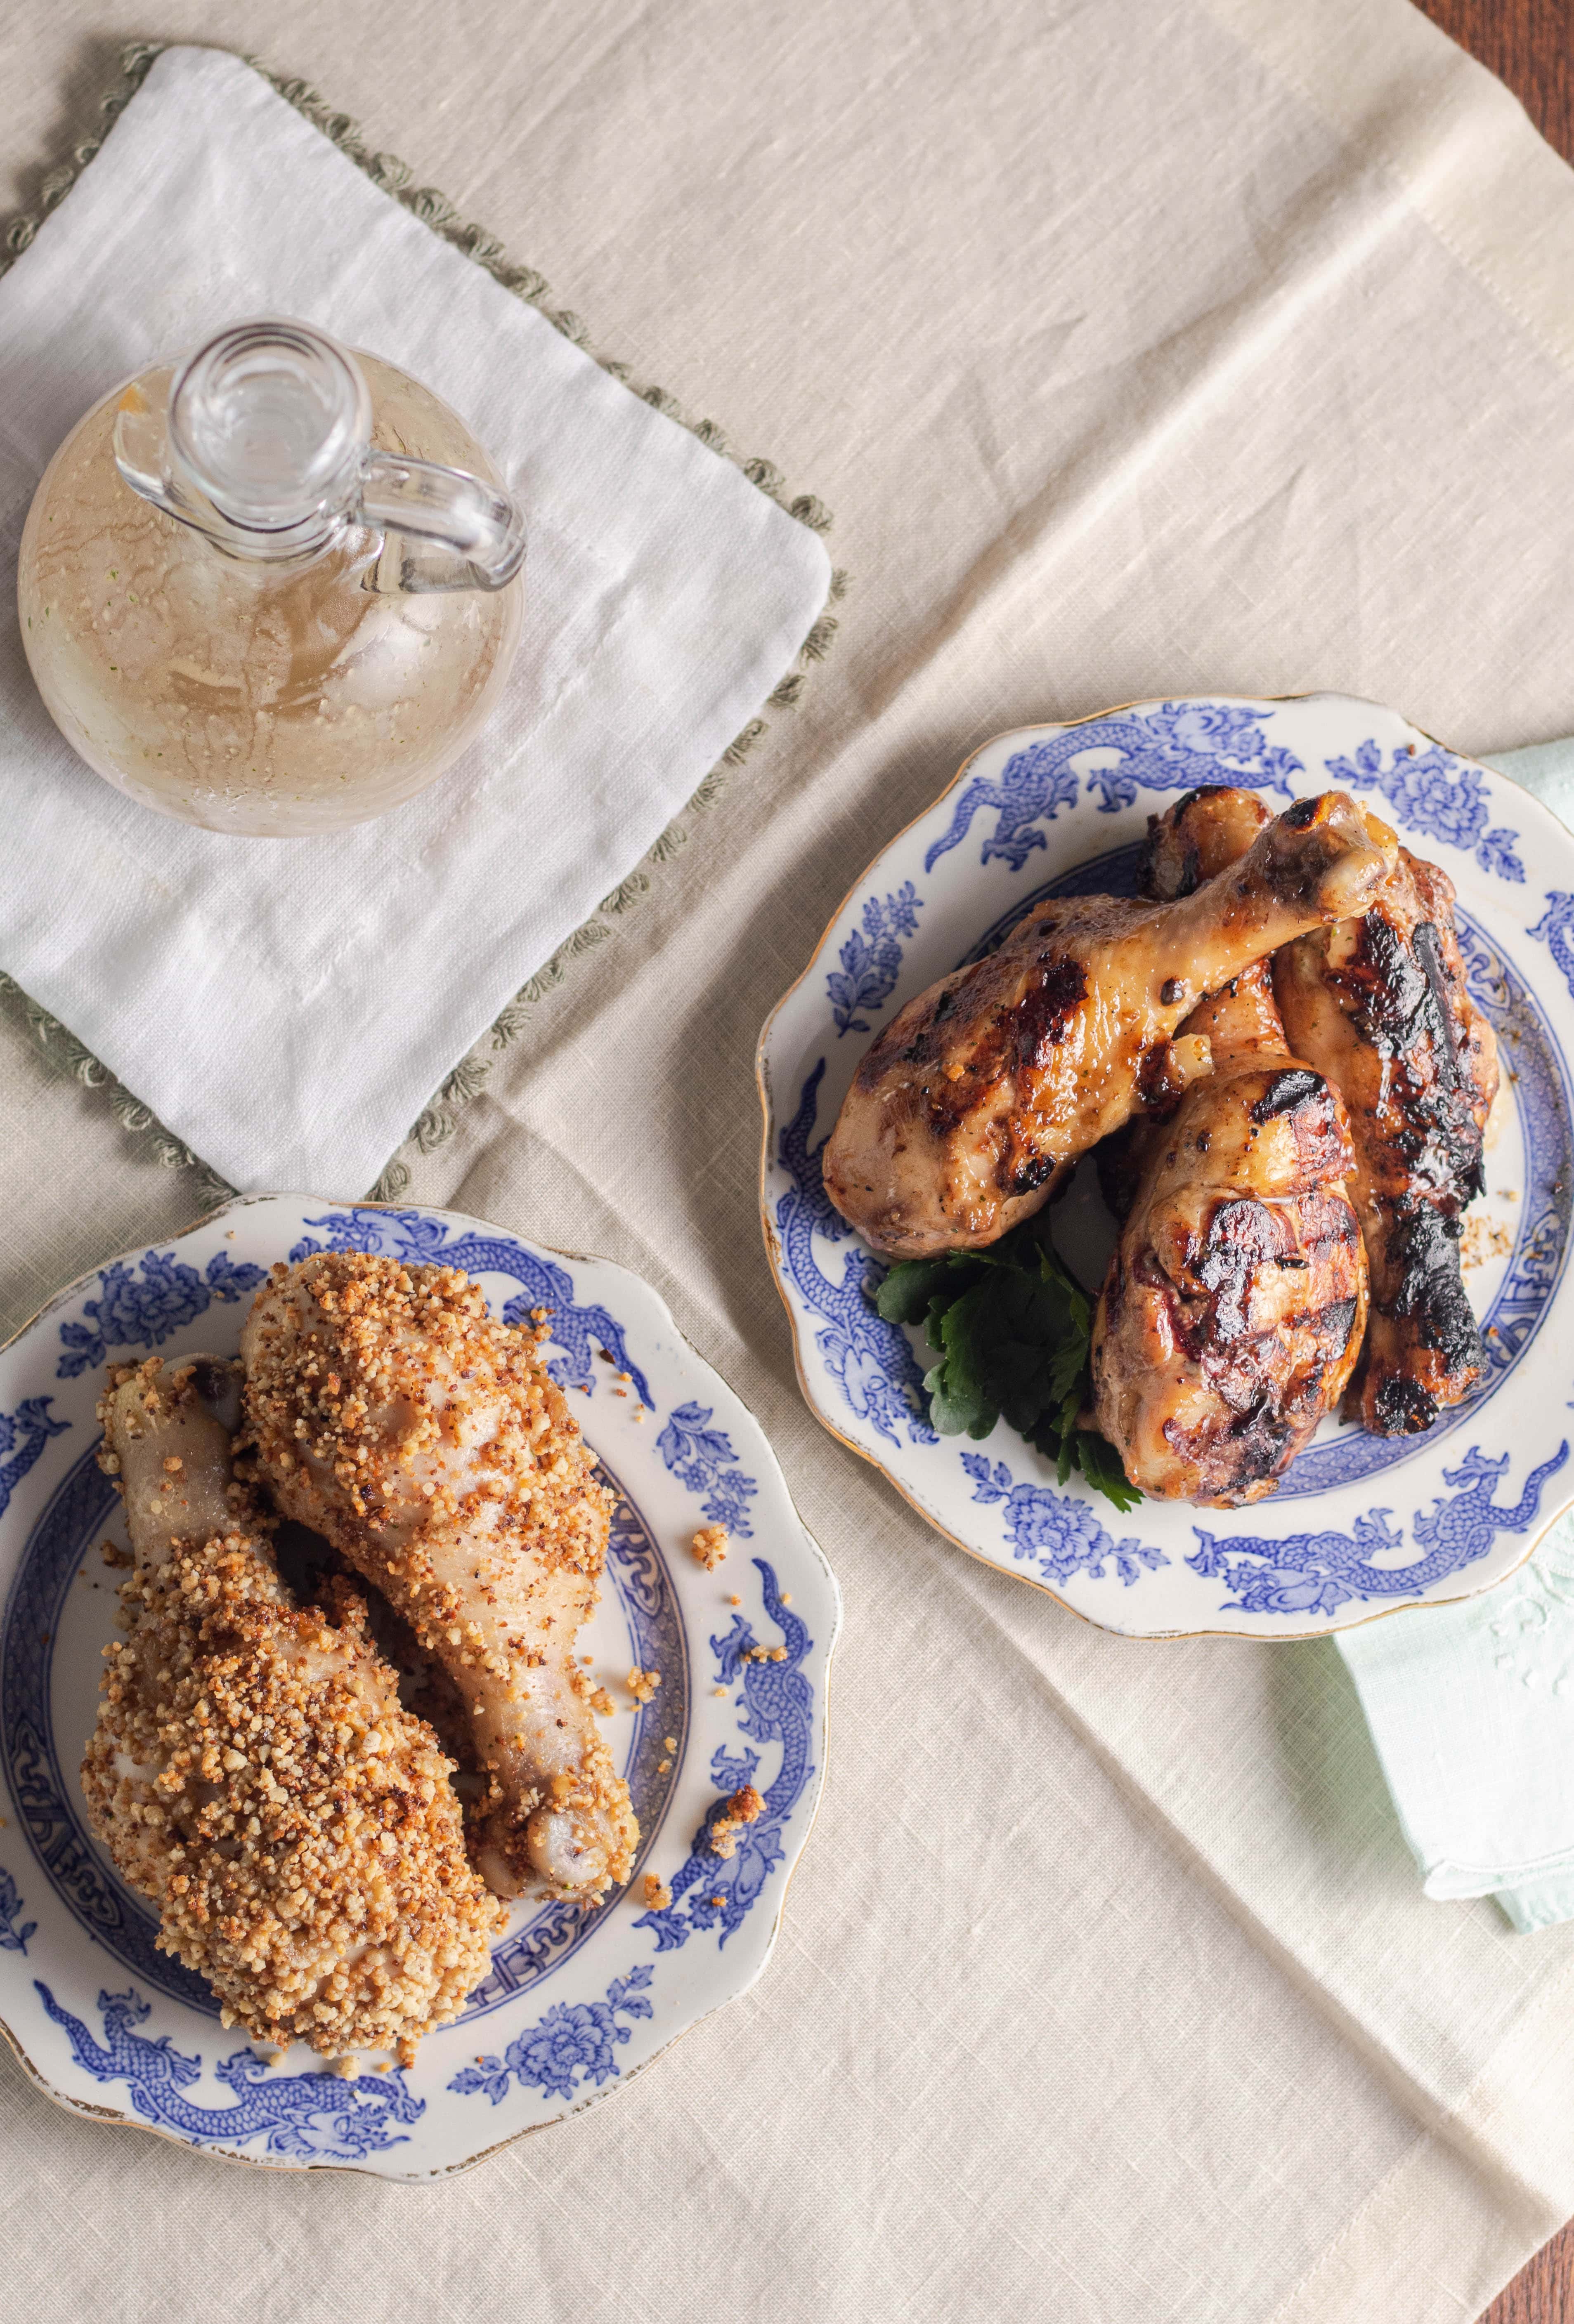 Marinated chicken drumsticks are baked till crispy or grilled.